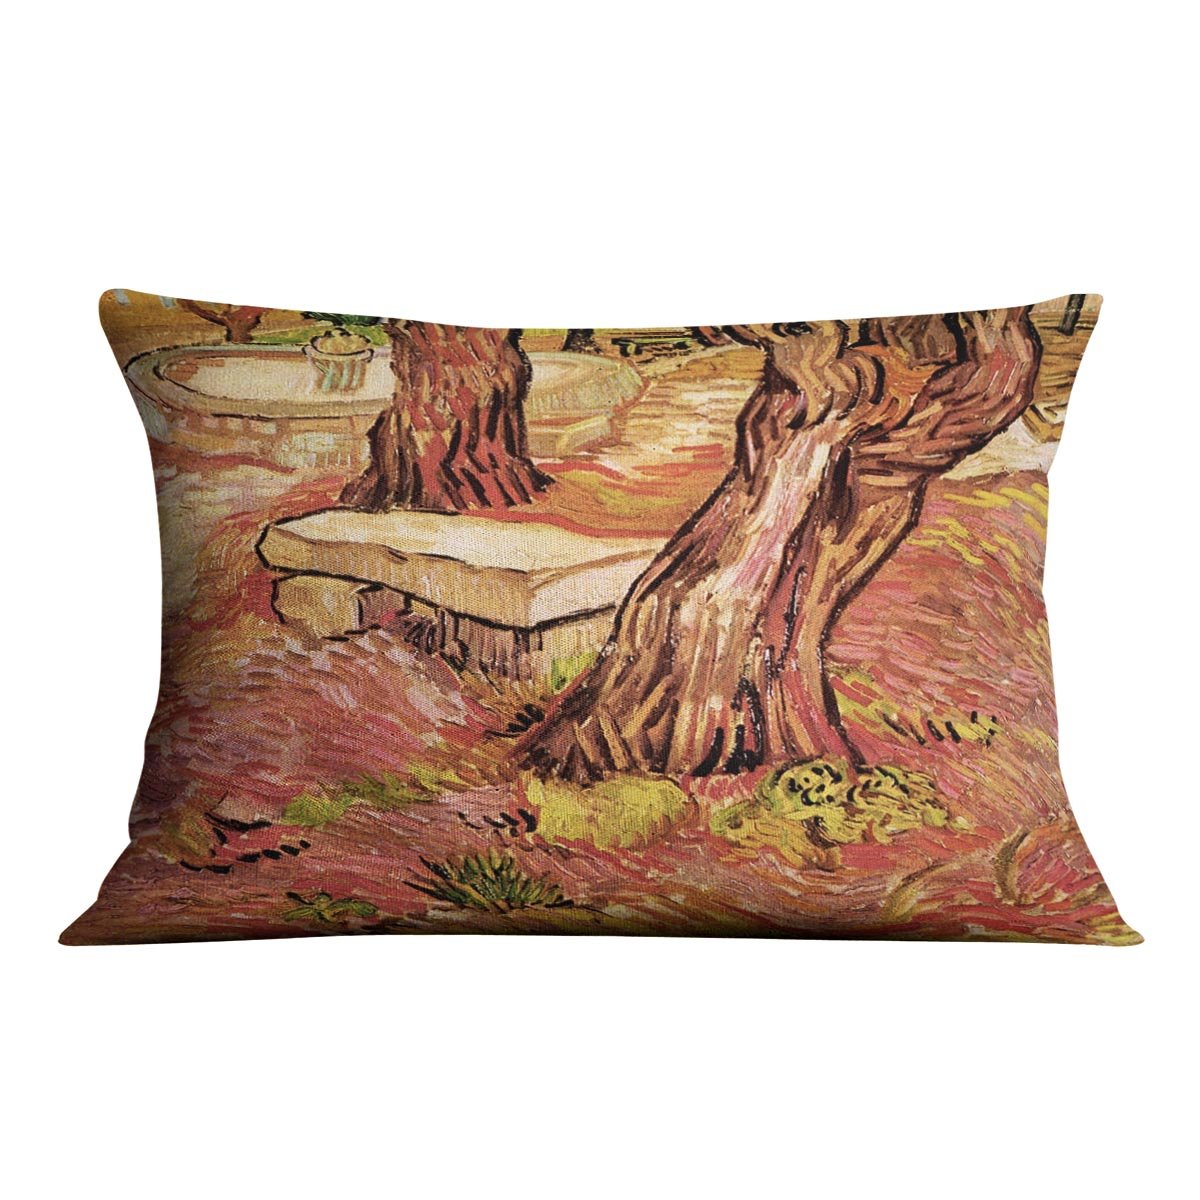 The Stone Bench in the Garden of Saint-Paul Hospital by Van Gogh Throw Pillow